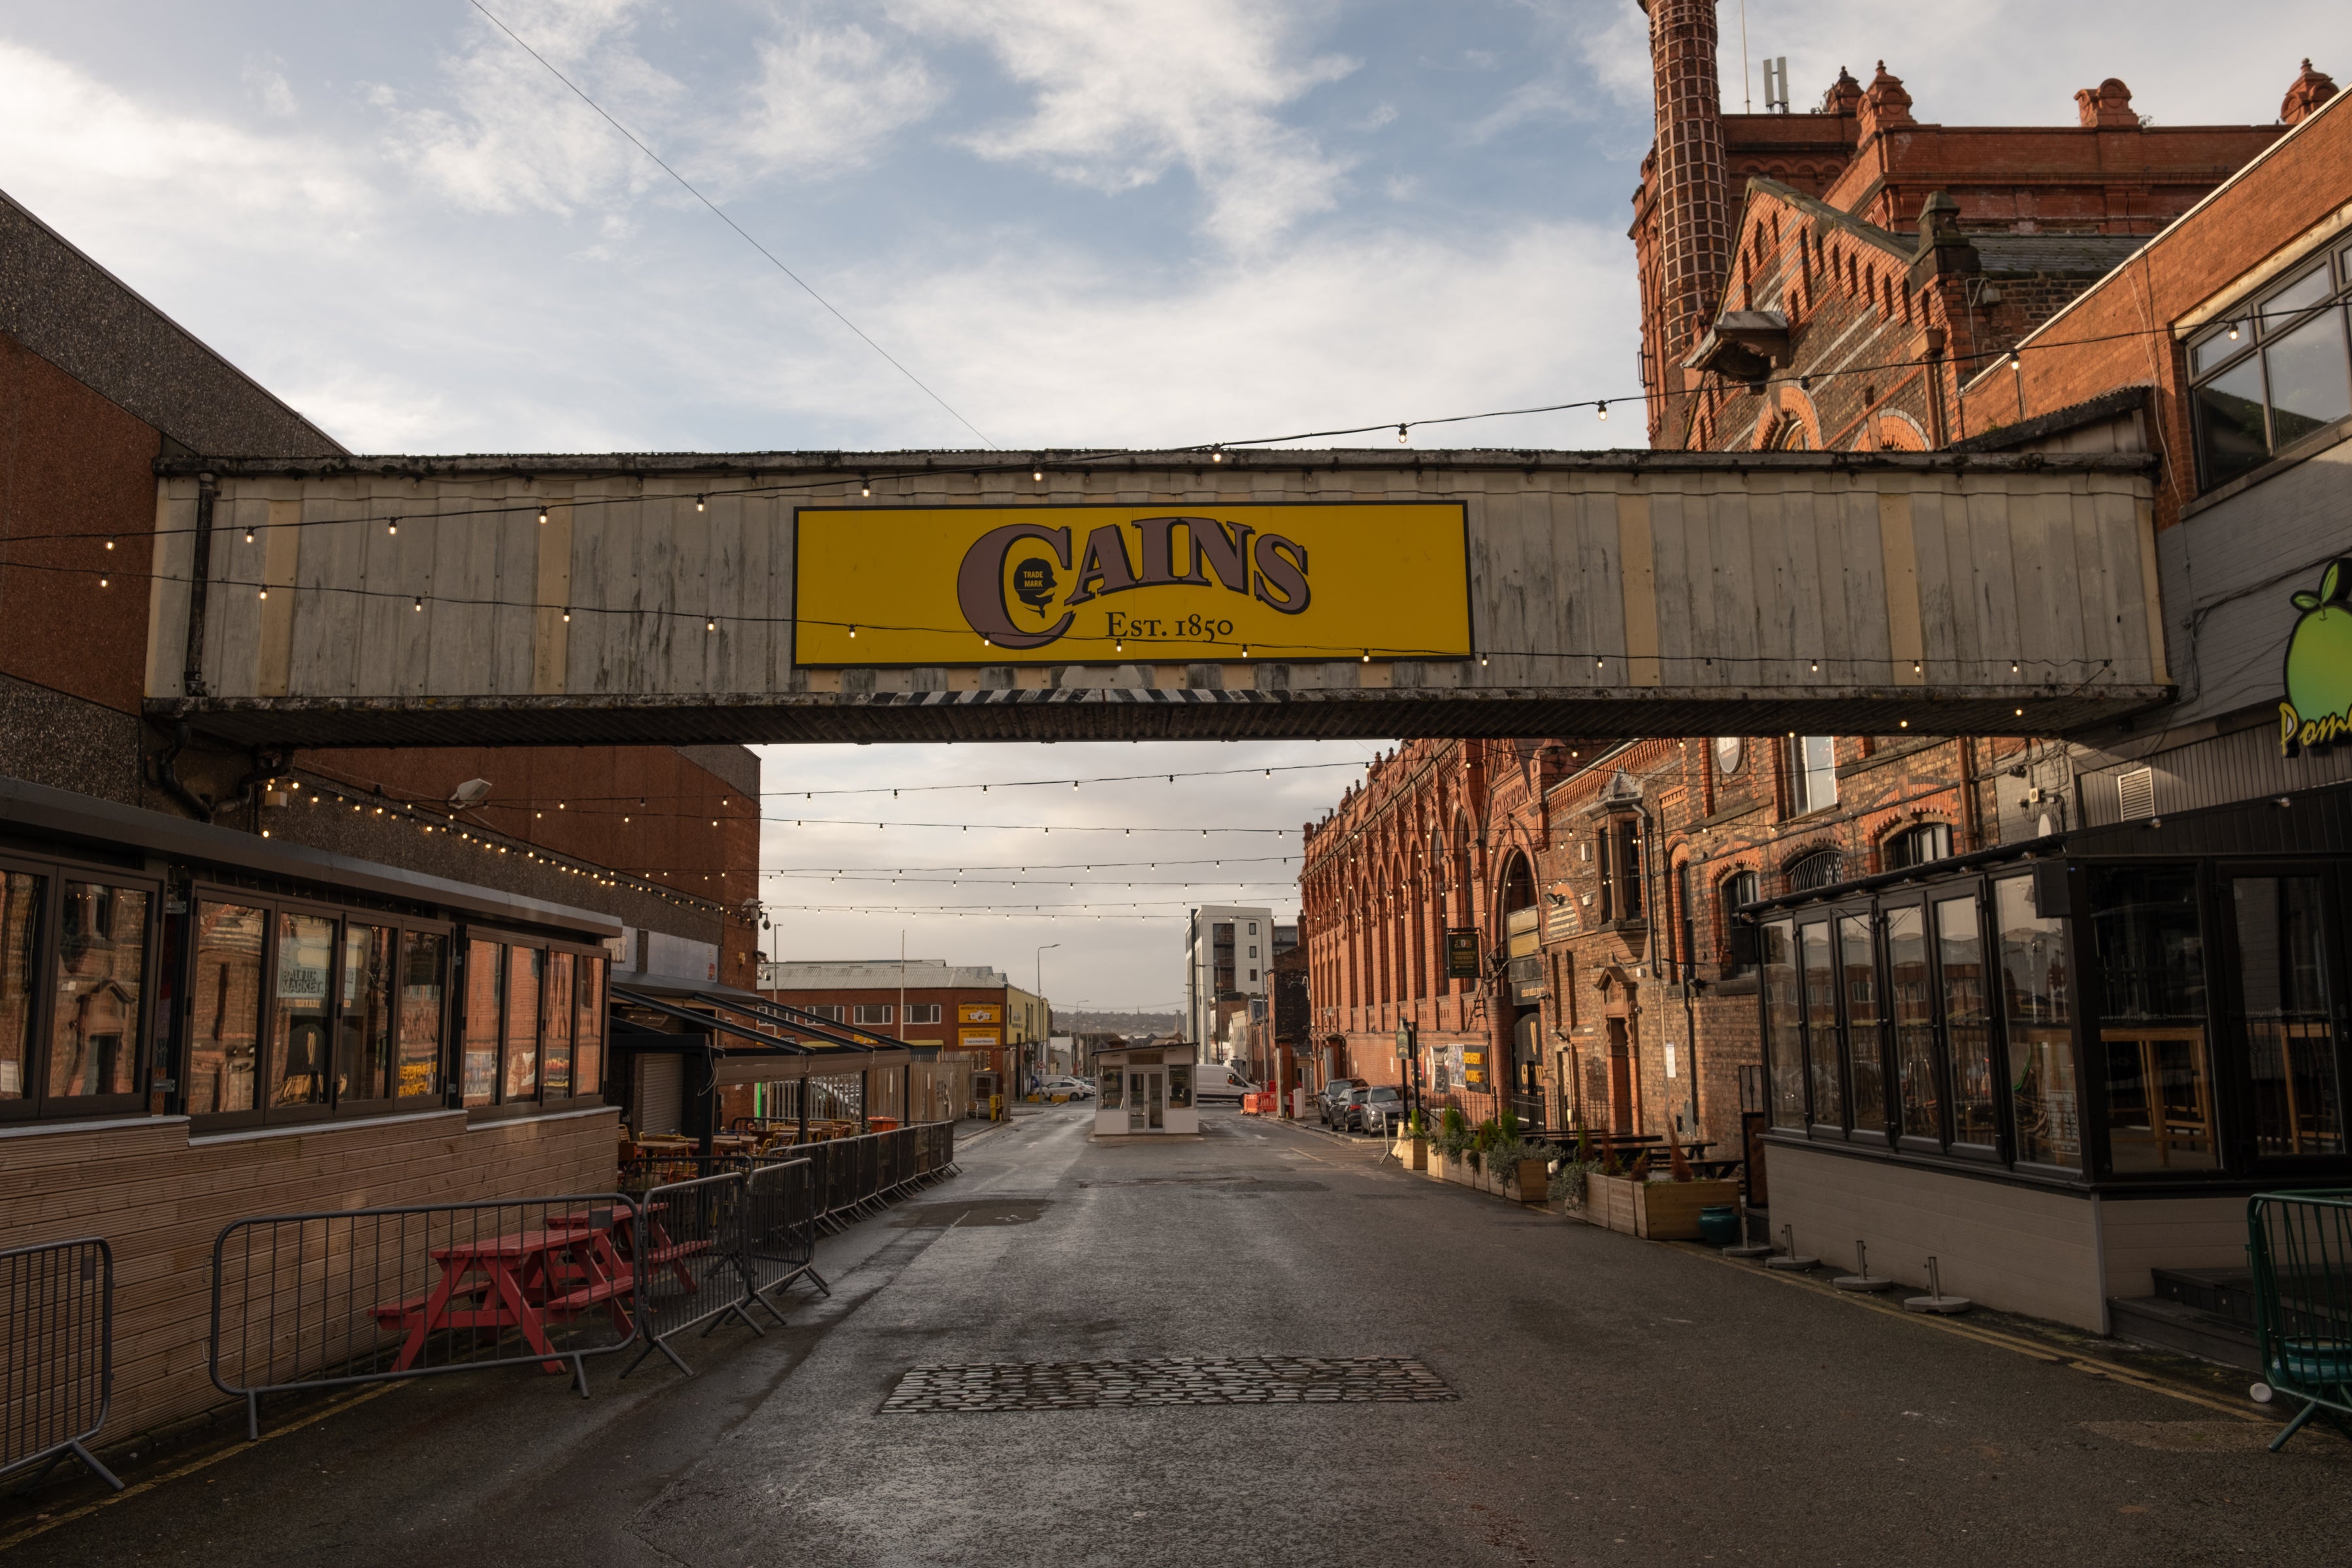 The Baltic Triangle has undergone a radical change in recent years